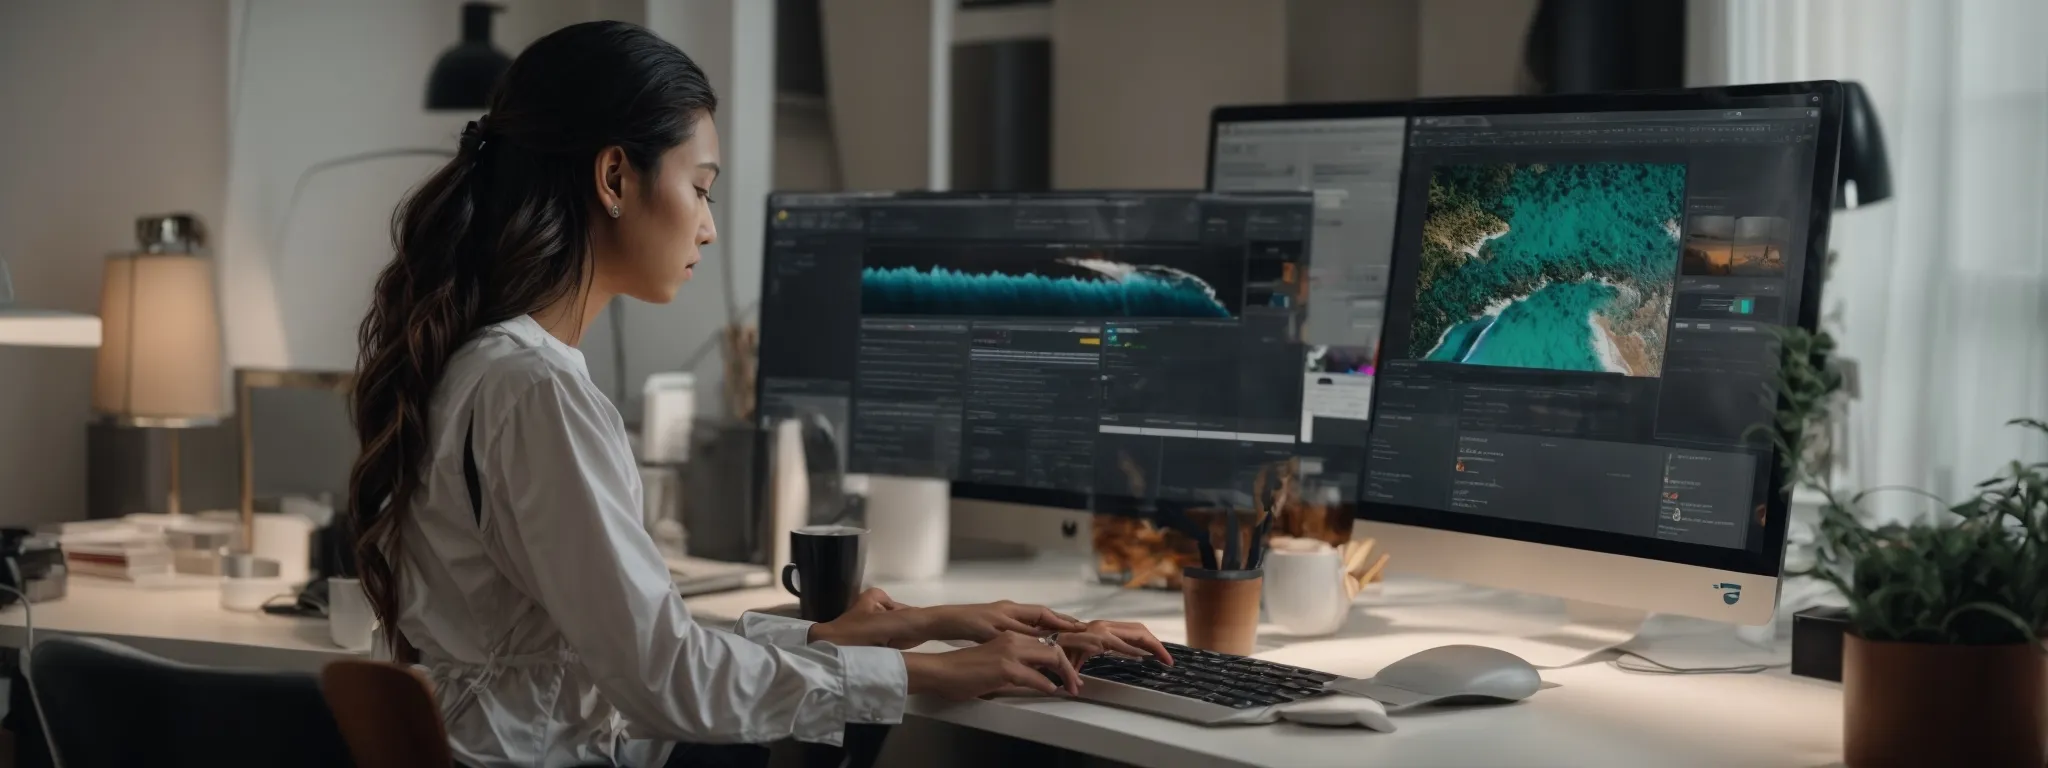 a person at a sleek workspace engages with an interactive canva interface on a modern computer, crafting a vibrant infographic.